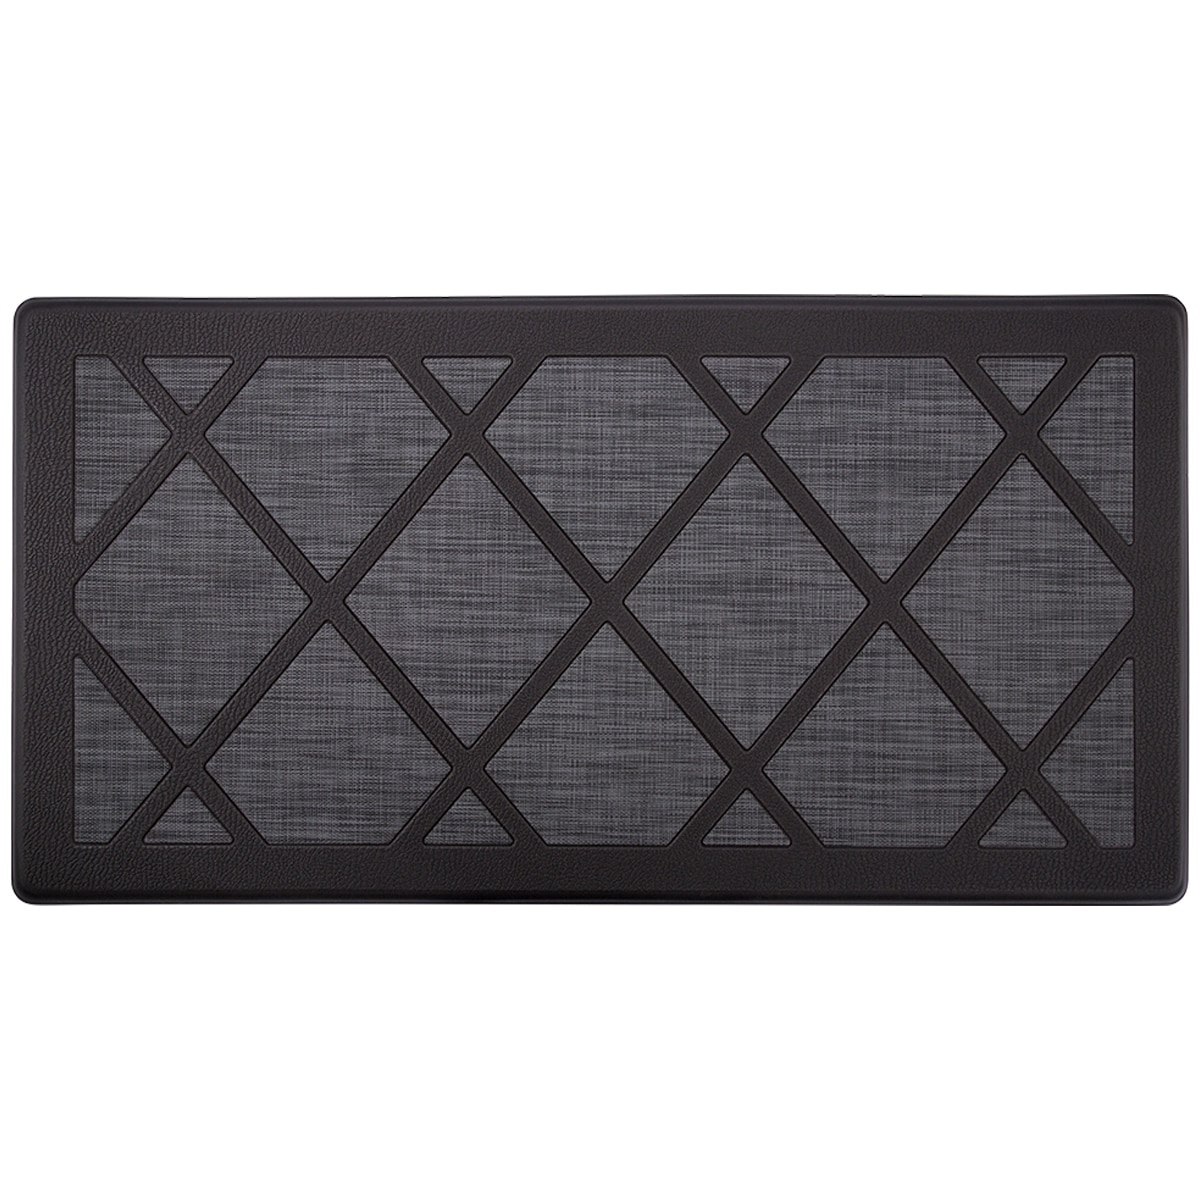 Town & Country Passages Kitchen Mat - Charcoal